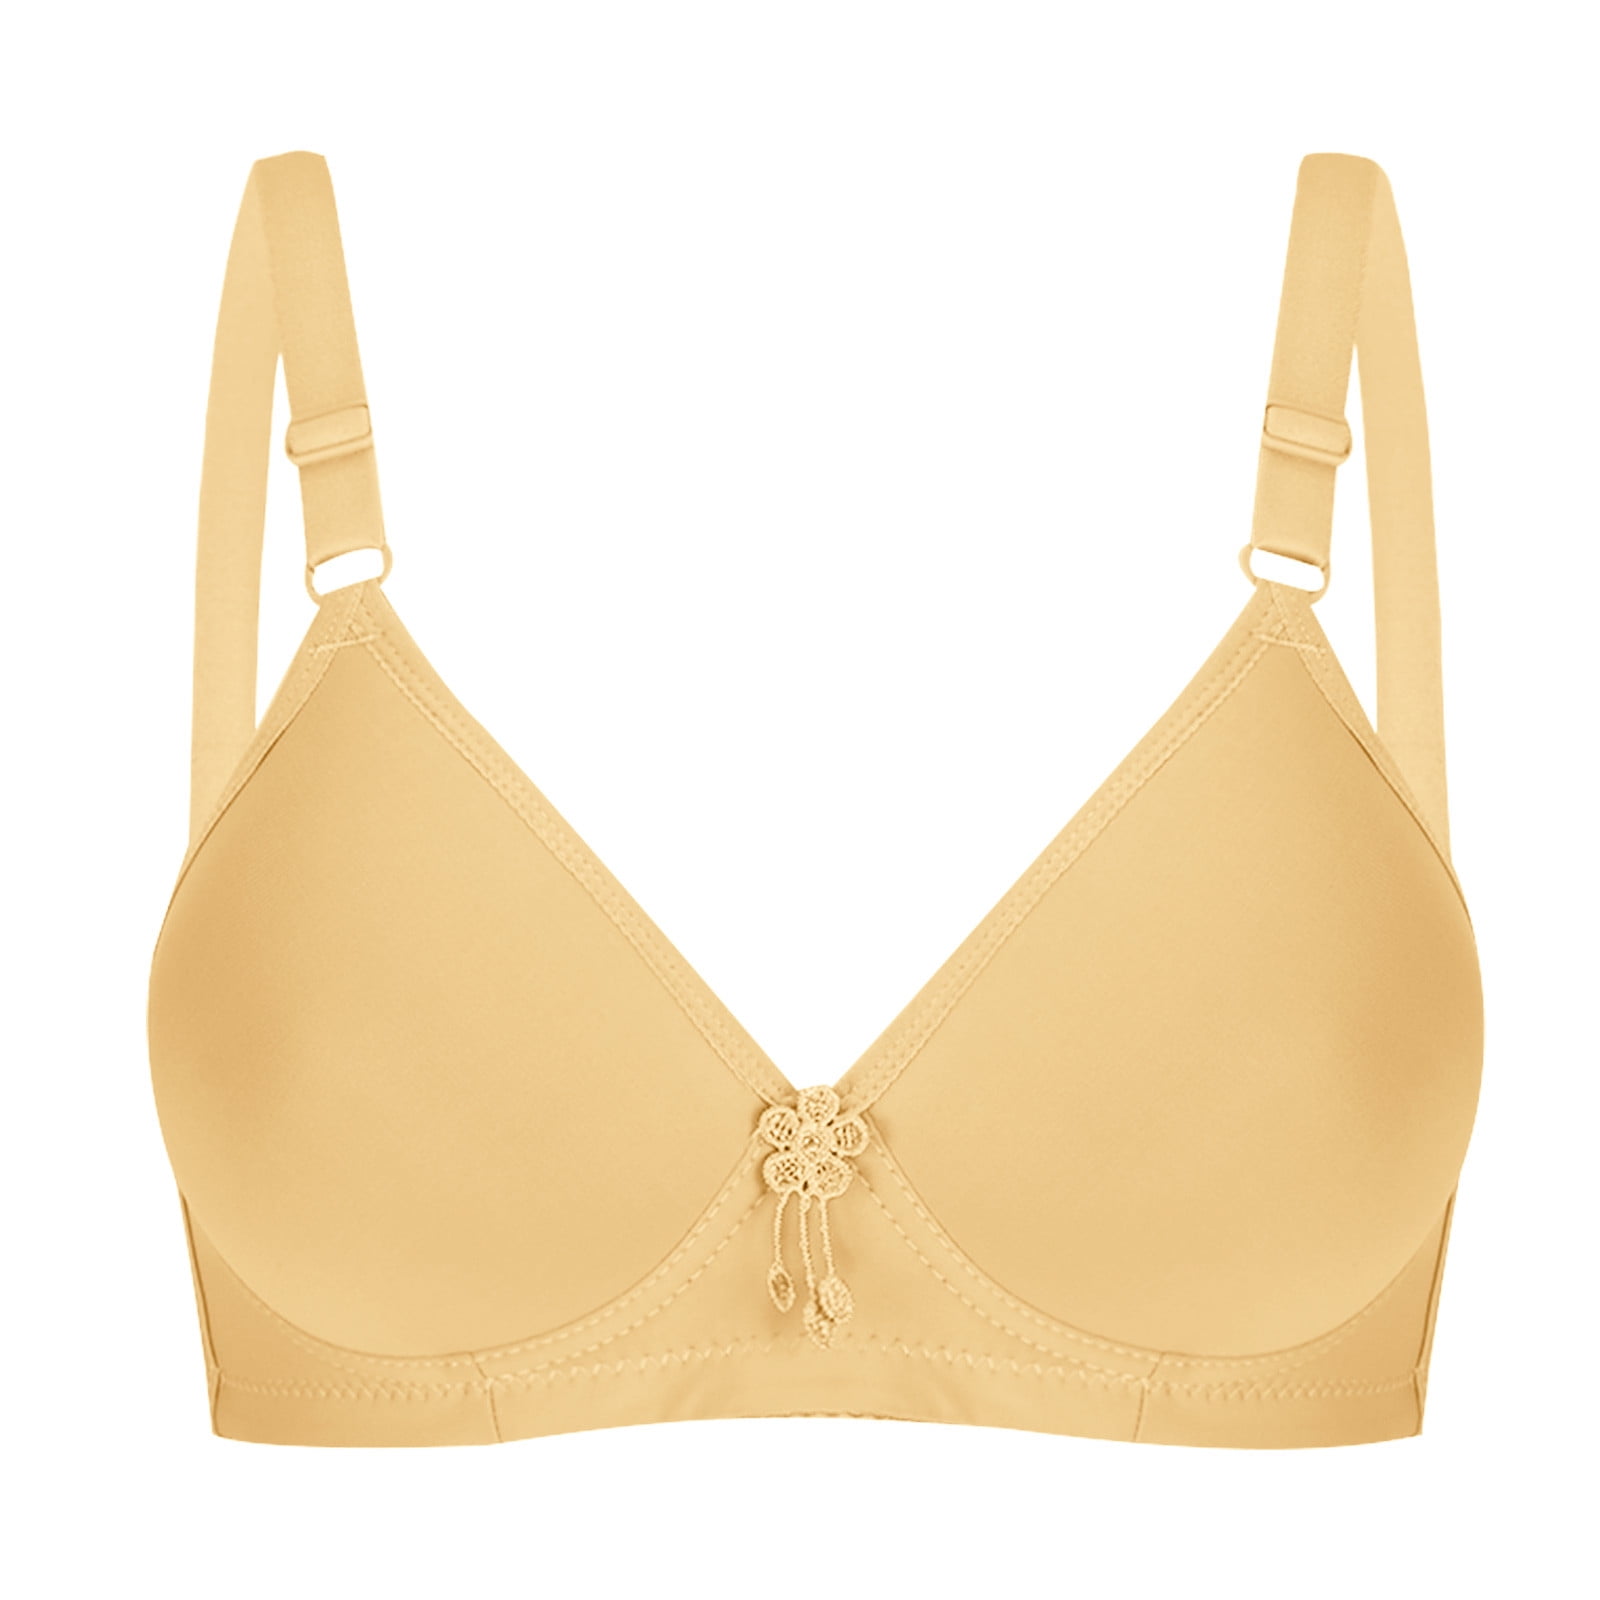 SBYOJLPB The Summer I Turned Pretty Sexy Bra Gathers Big Cup Lace Jacquar D  Underwear for Women (Beige)